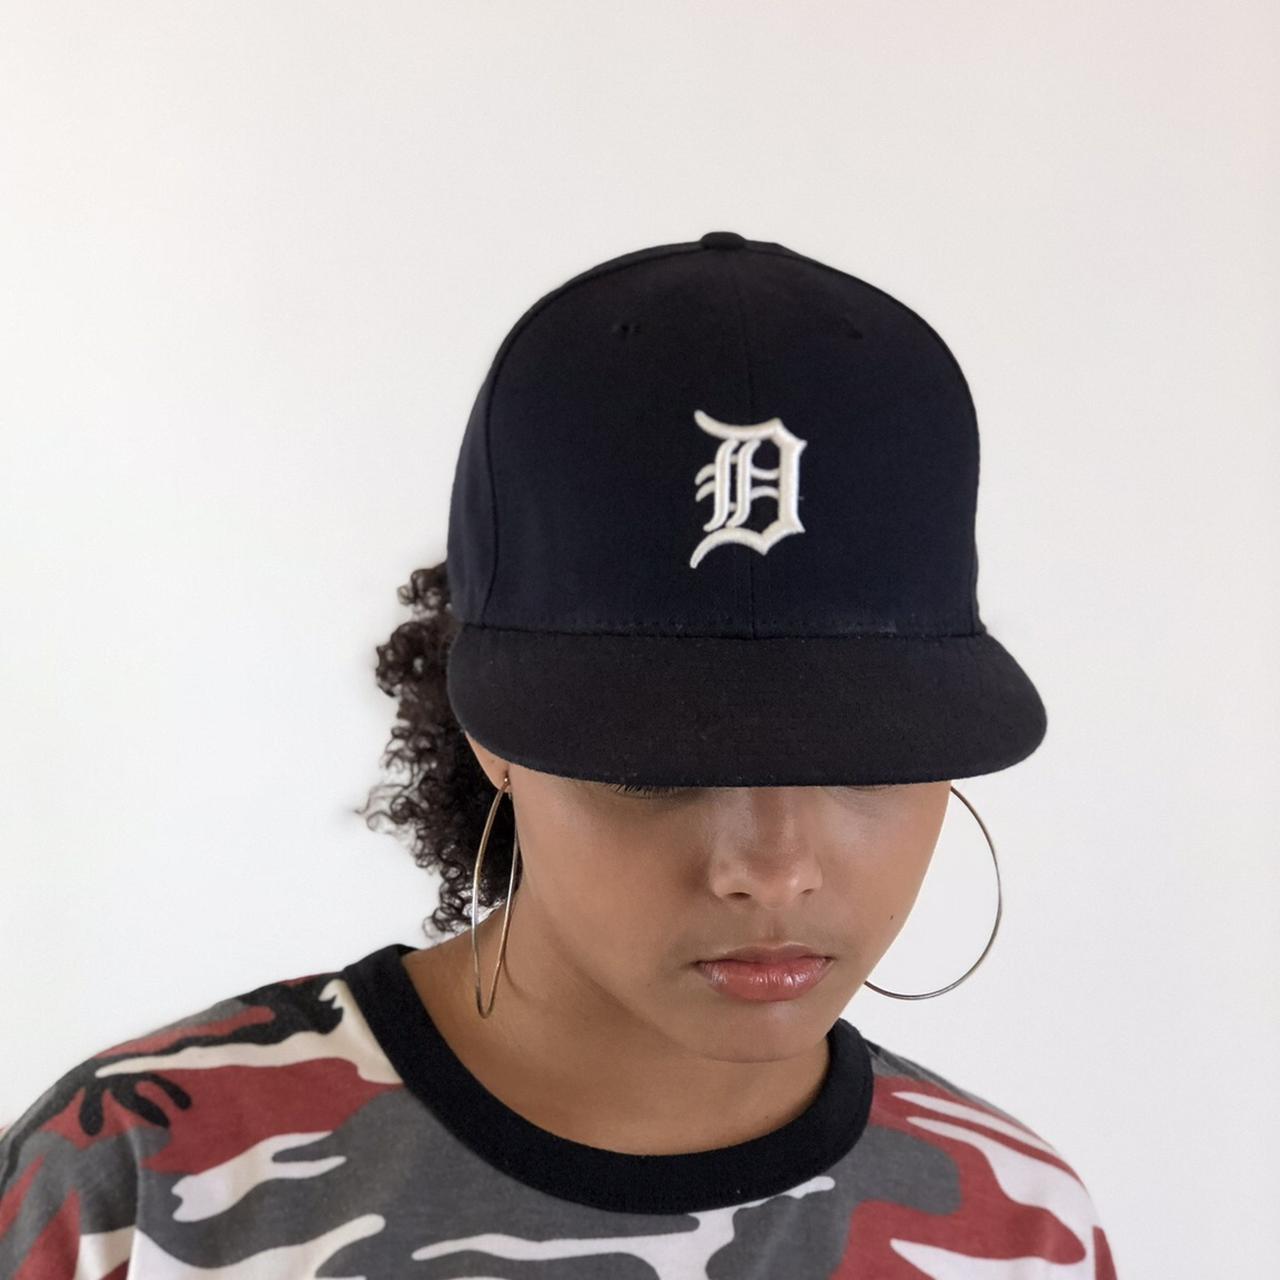 Signed Detroit Tigers Fitted Baseball Cap - 7 1/2 - Depop